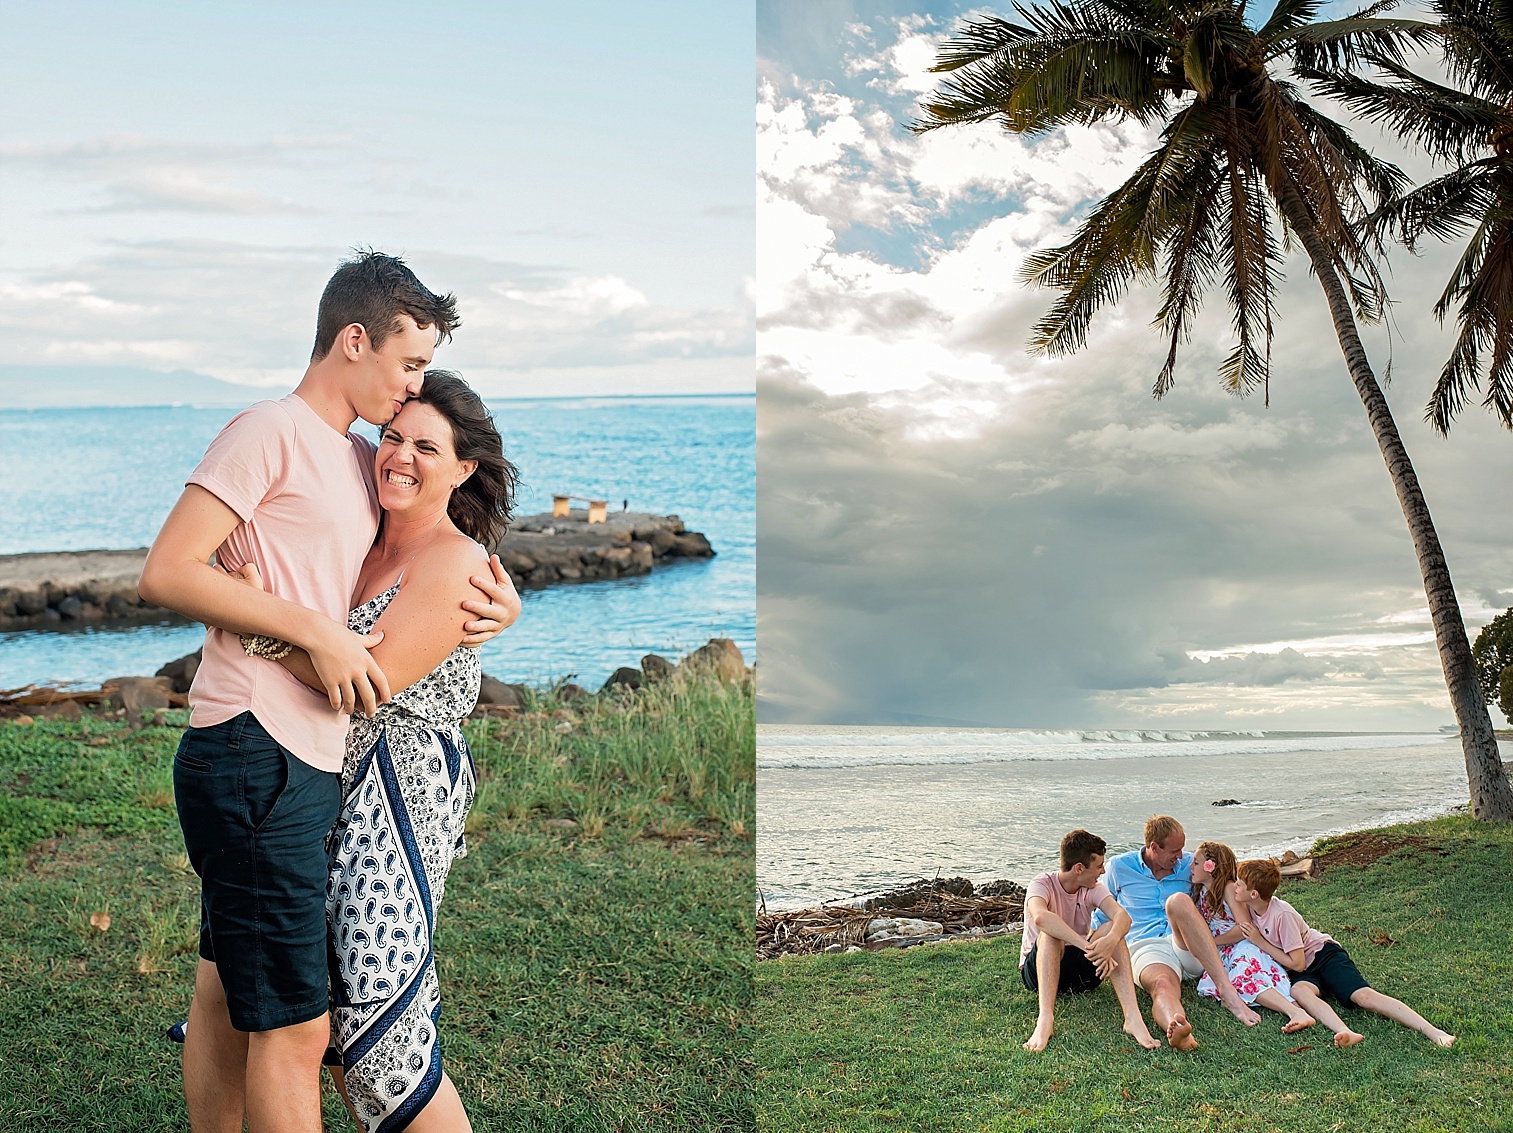 Family time on vacation for a photo session on Maui